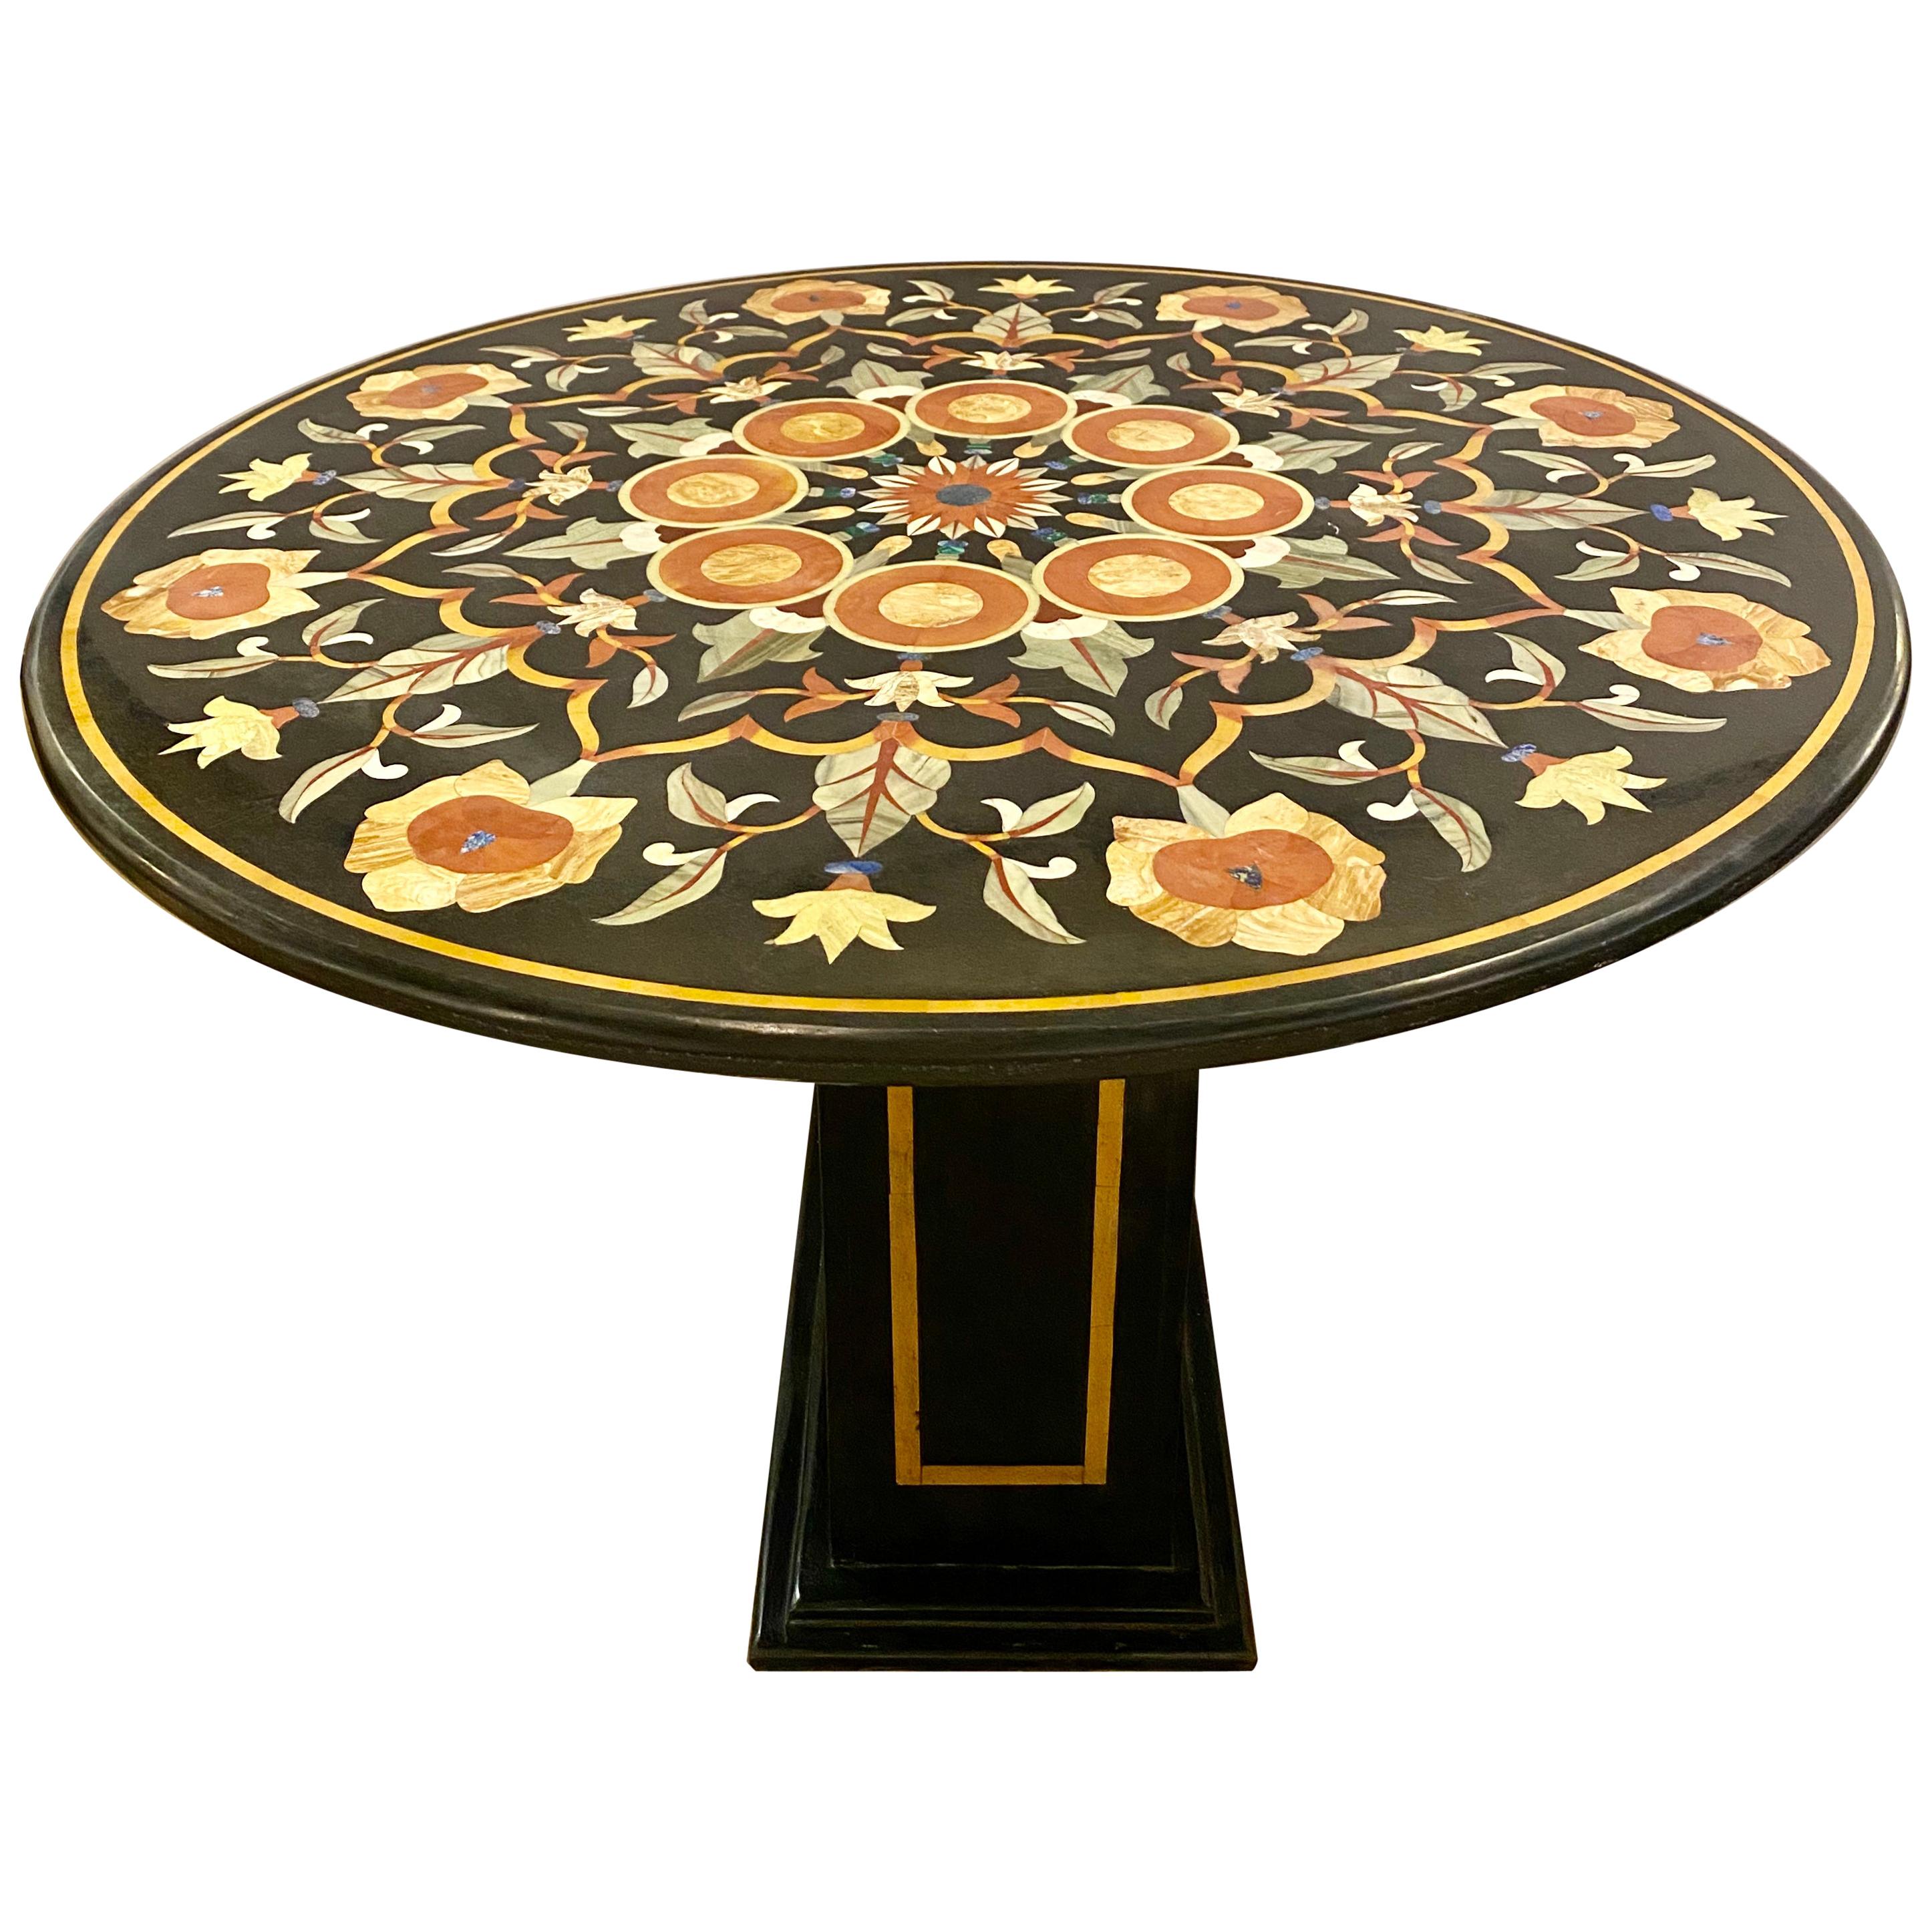 Pietra Dura Marble-Top Dining or Center Table, Arts & Crafts Movement